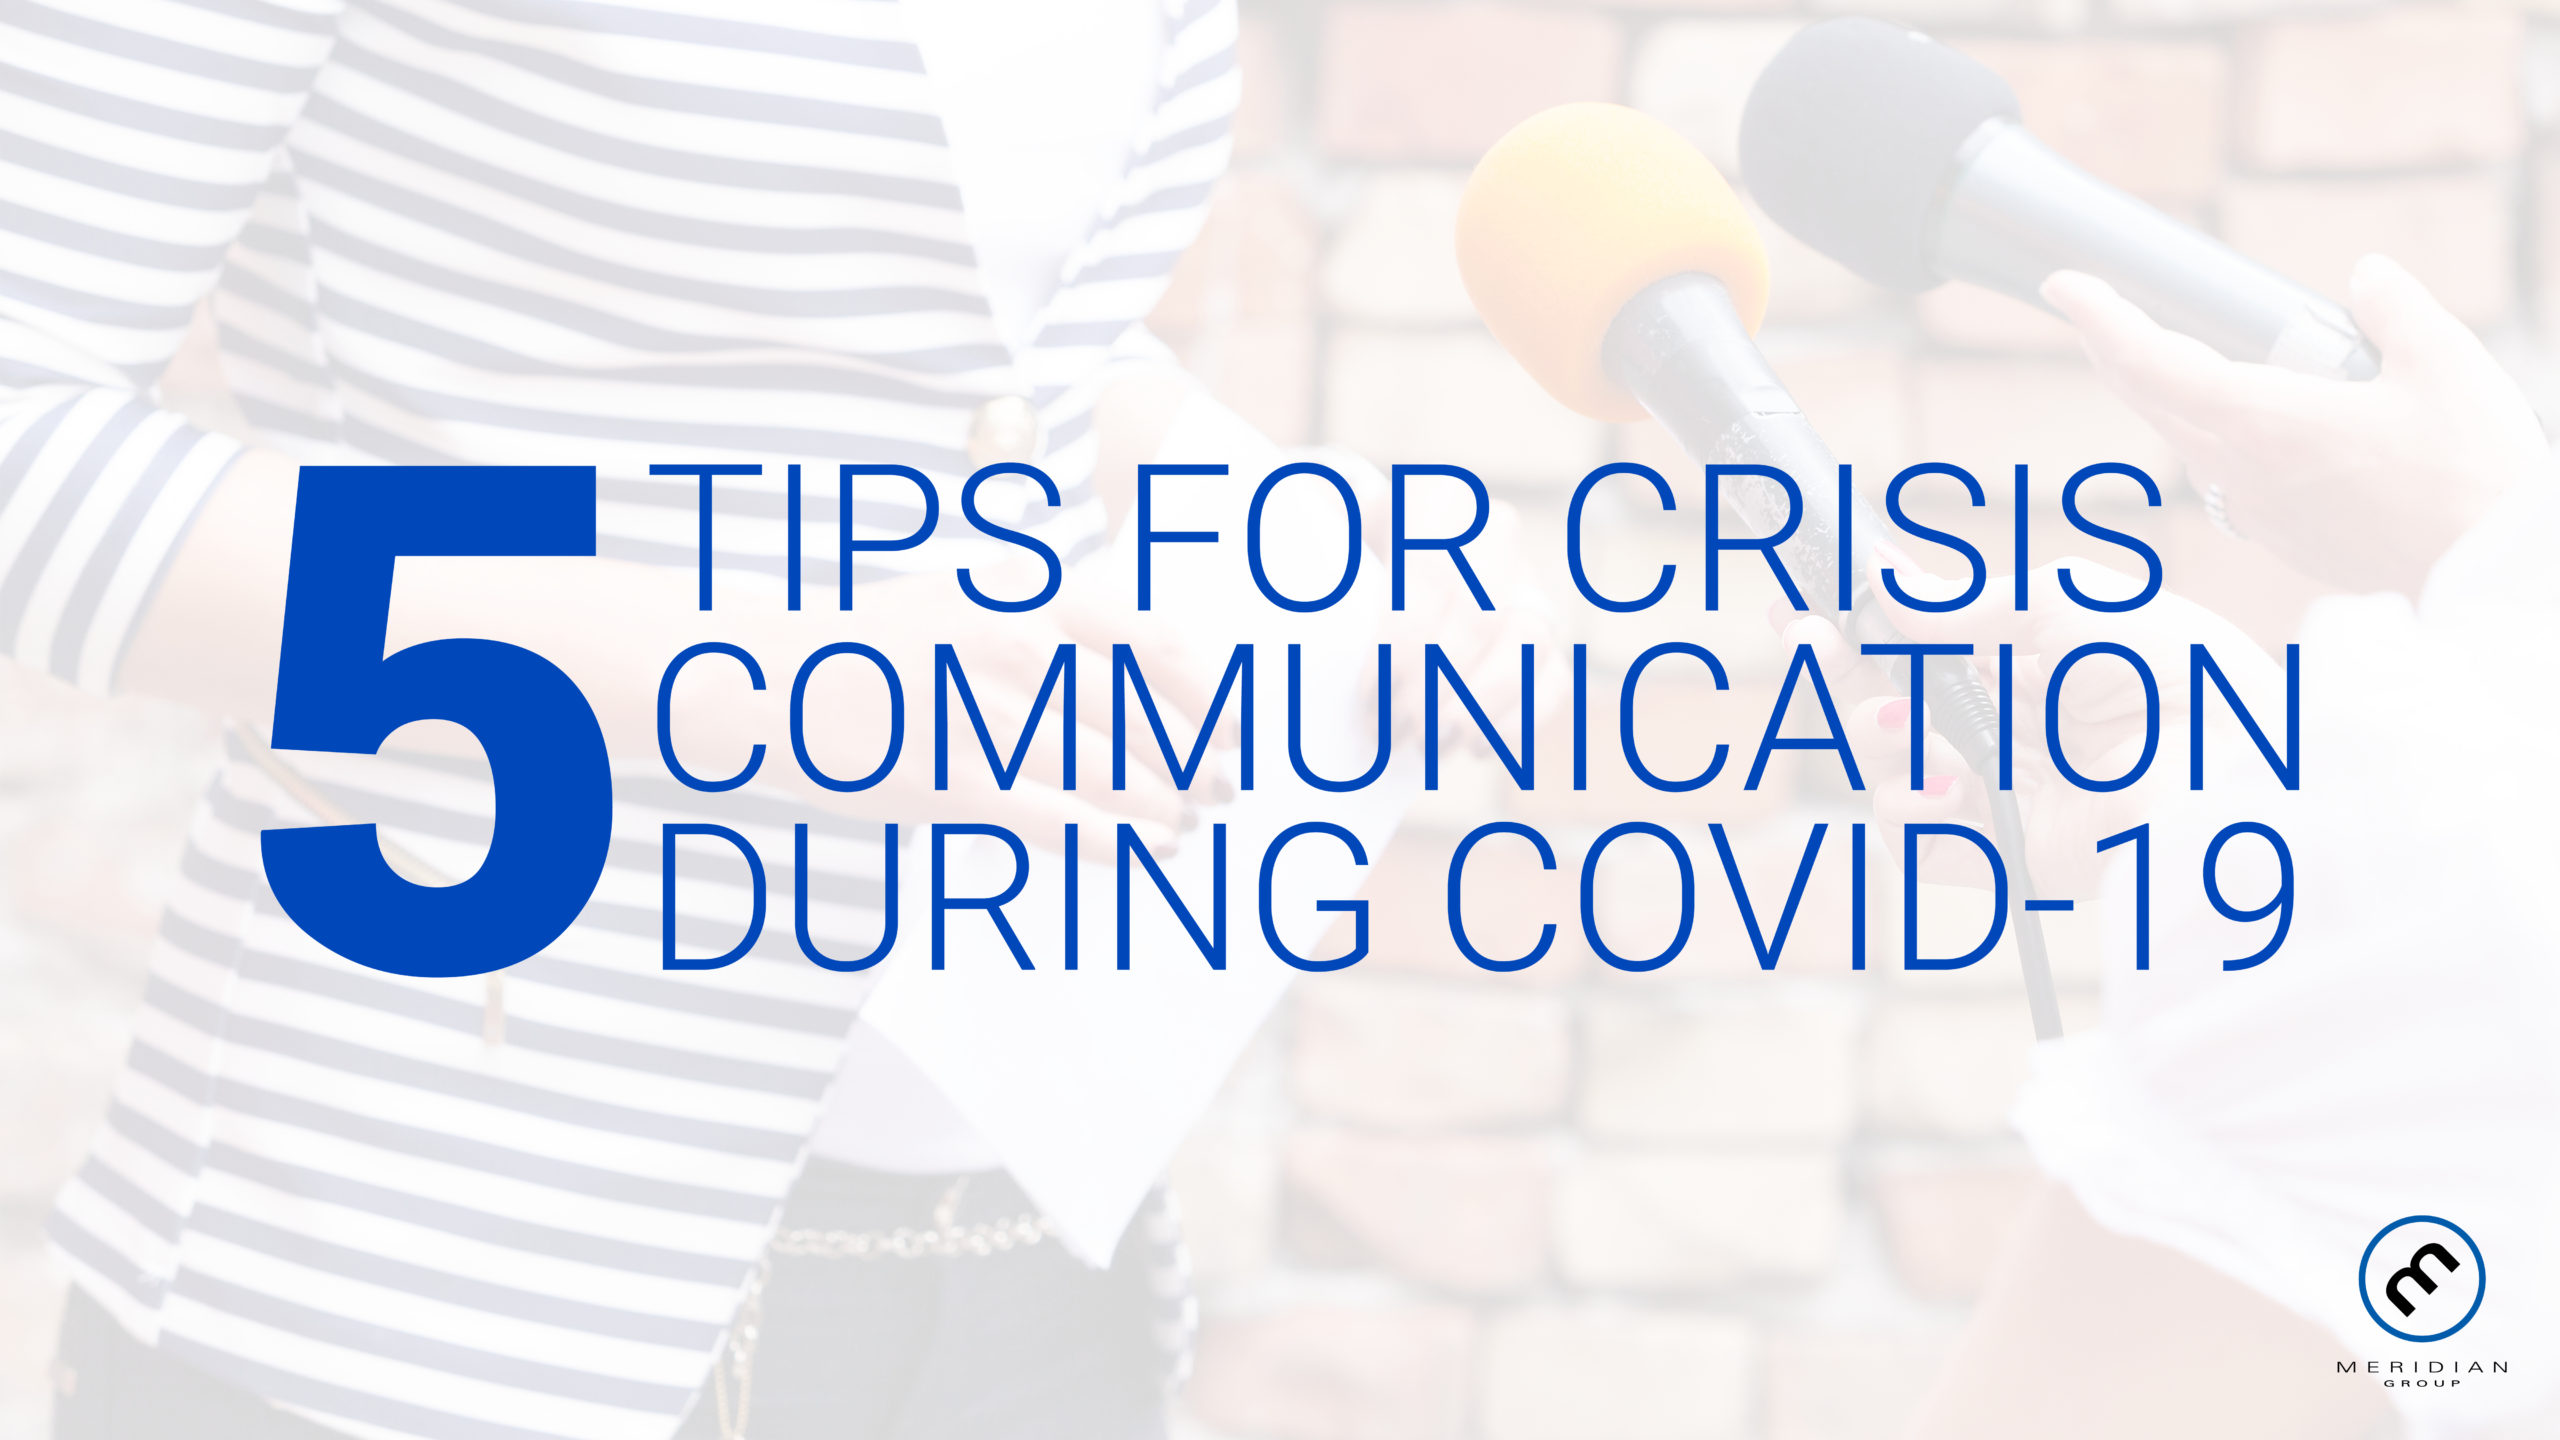 5 Tiips for Crisis Communication